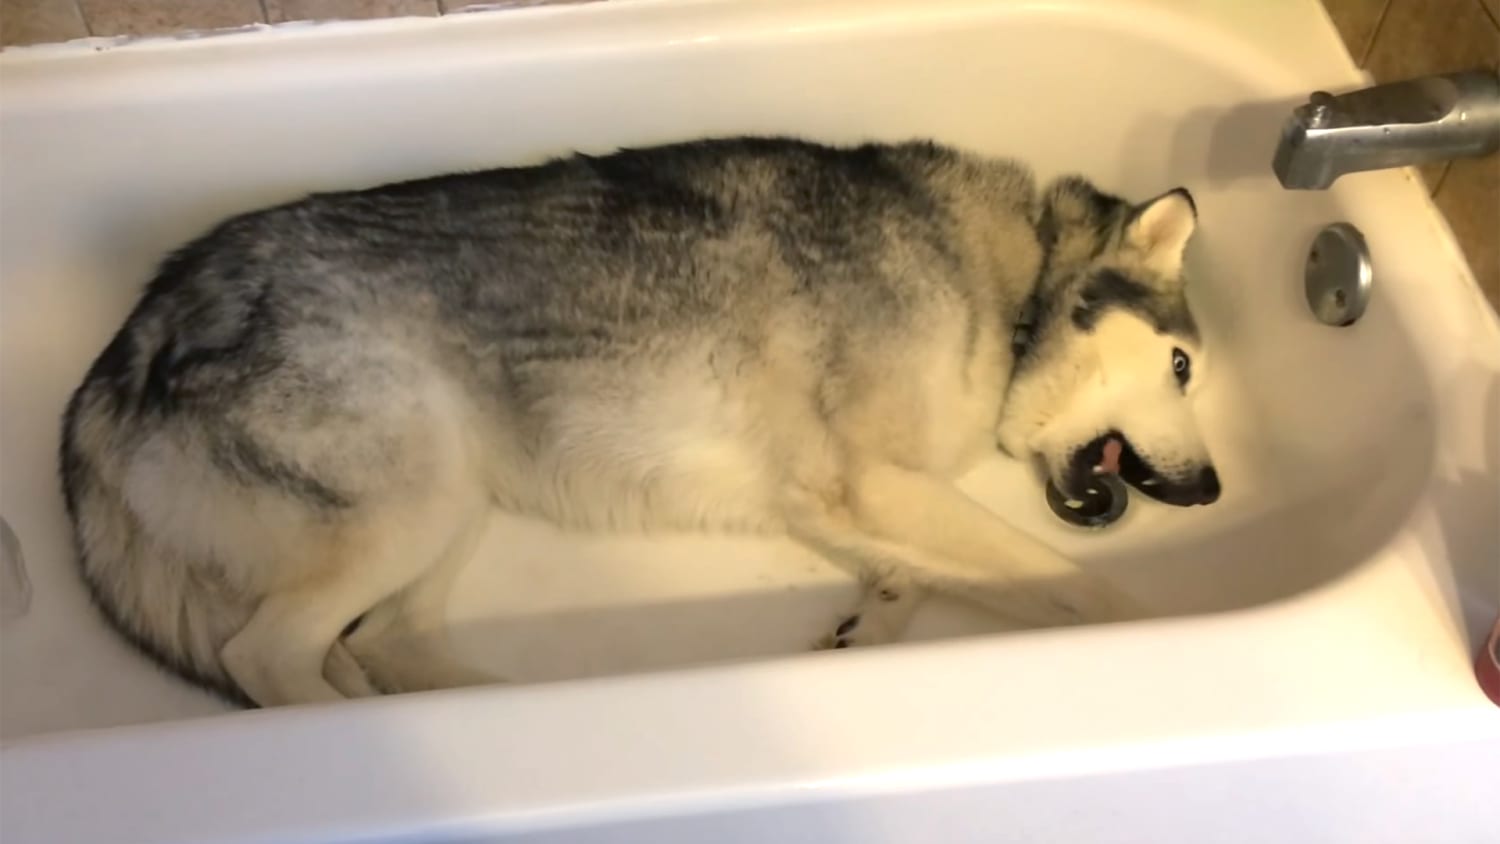 can 5 week old husky be bathed